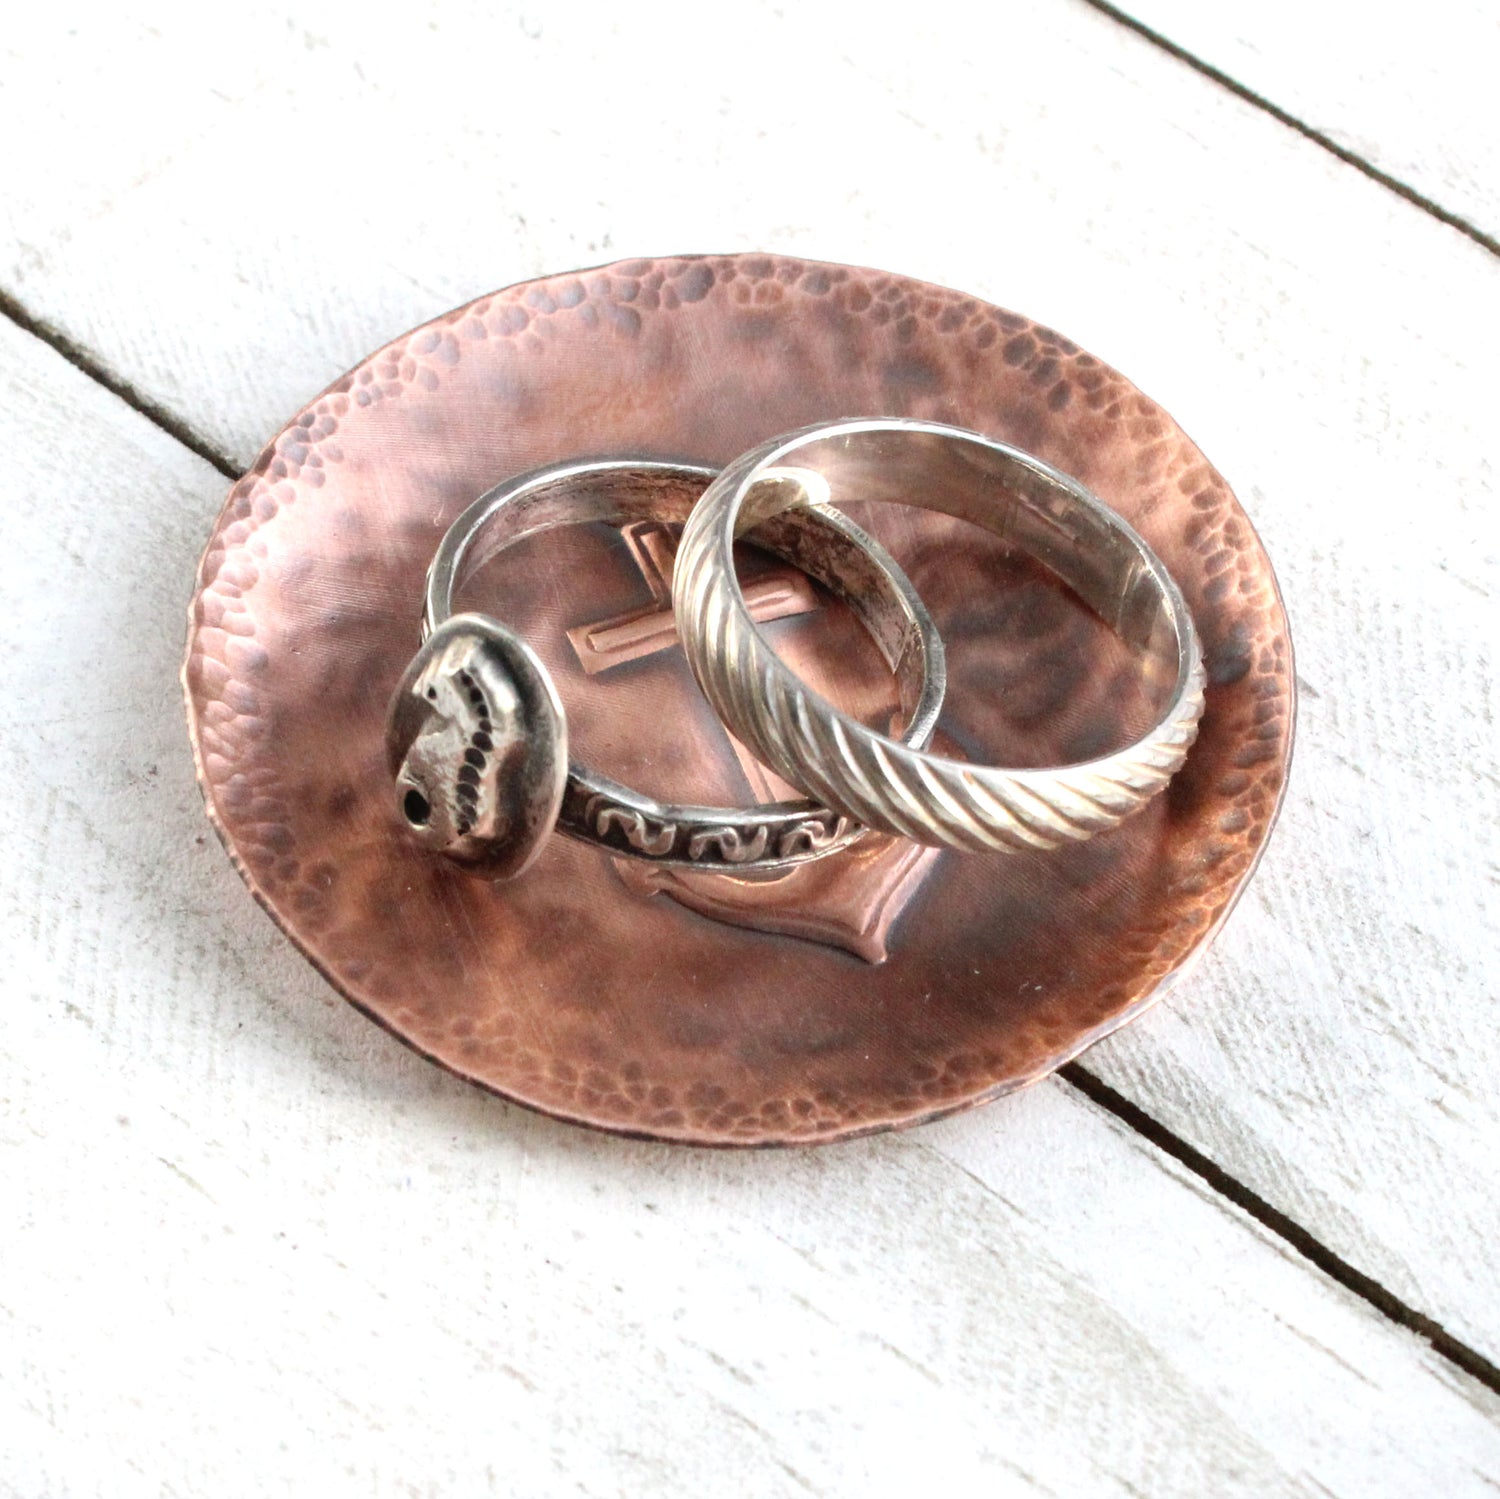 Copper ring or jewelry or trinket dish with a raised impression of a boat anchor. The edged of the dish are curved up slightly, the copper metal has a hammered texture, and the dish is oxidized to enhance the detail. Shown with rings set on the dish.